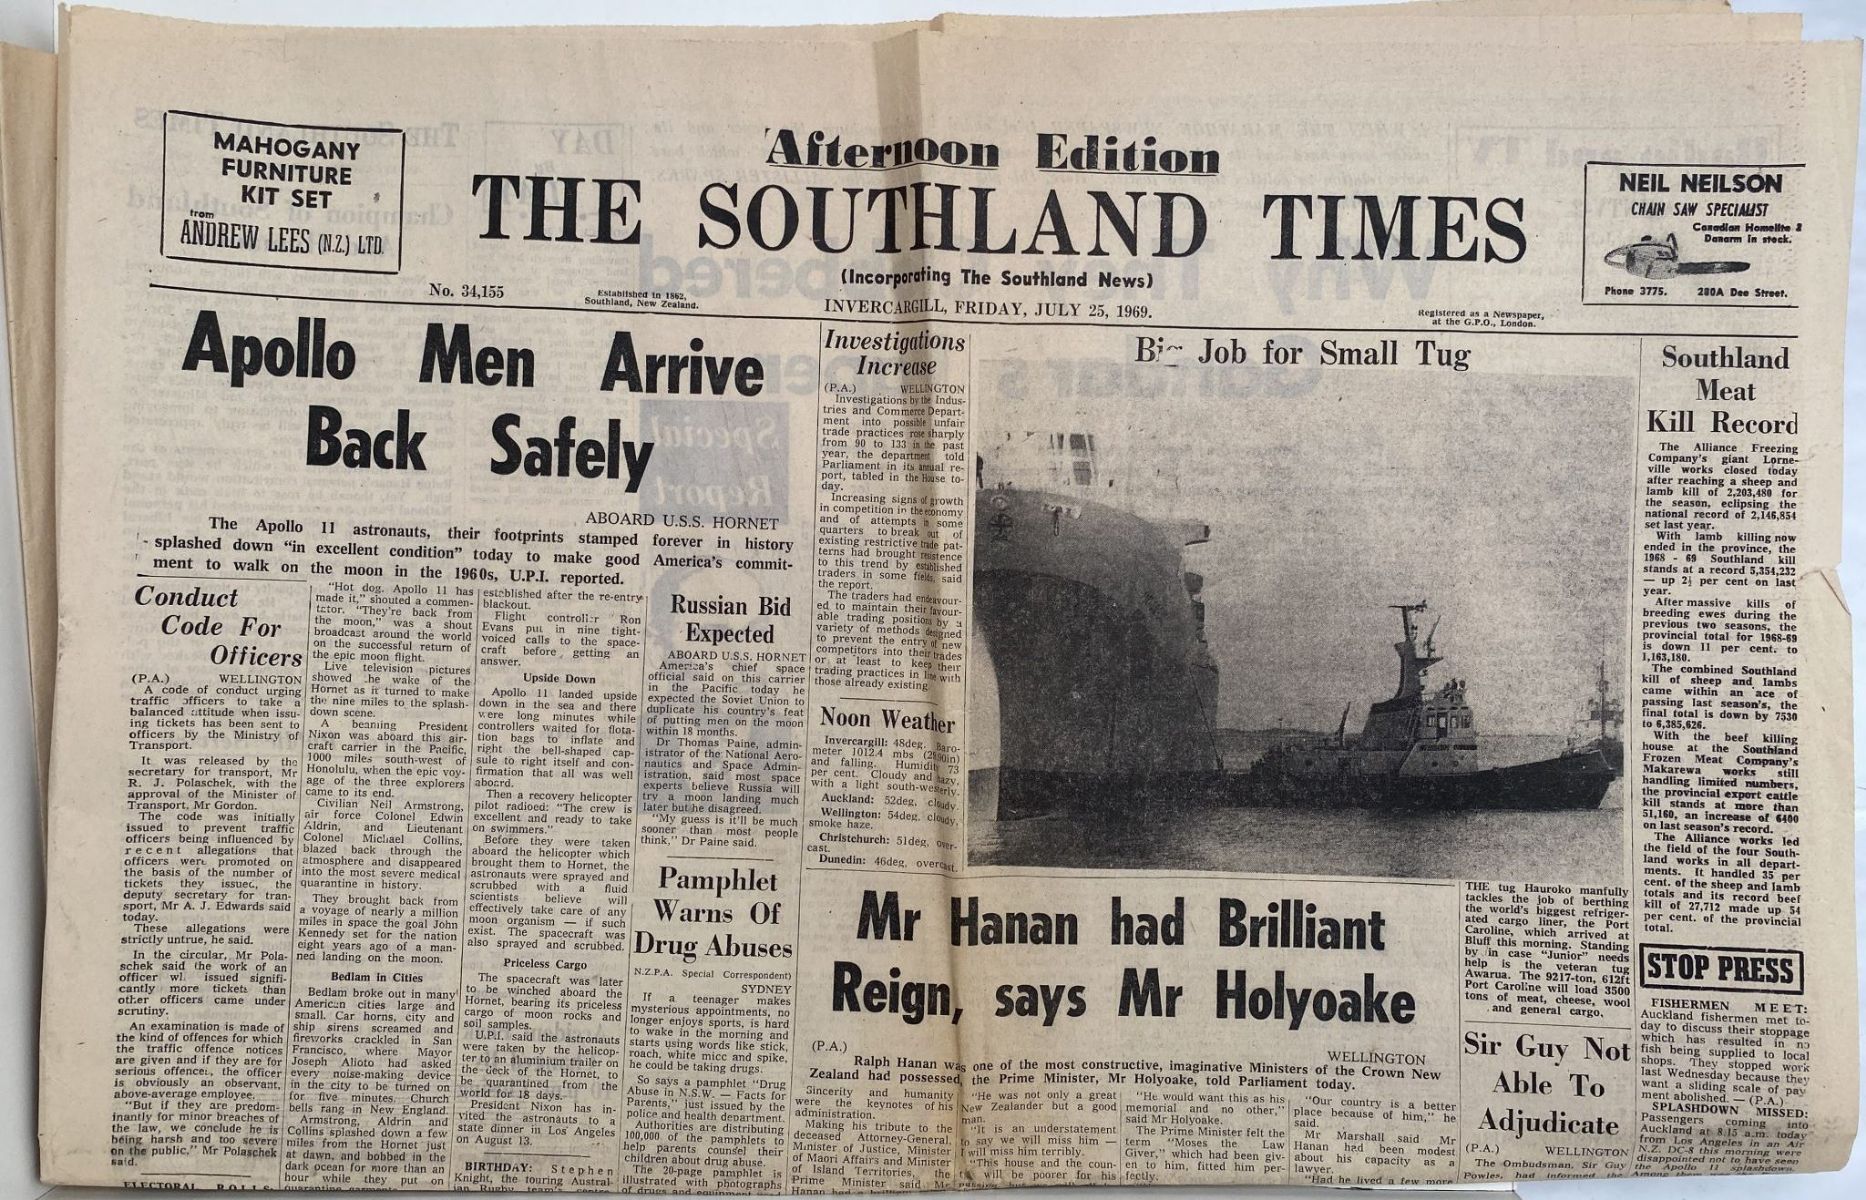 OLD NEWSPAPER: The Southland Times, 25 July 1969 - Moon Landing Special